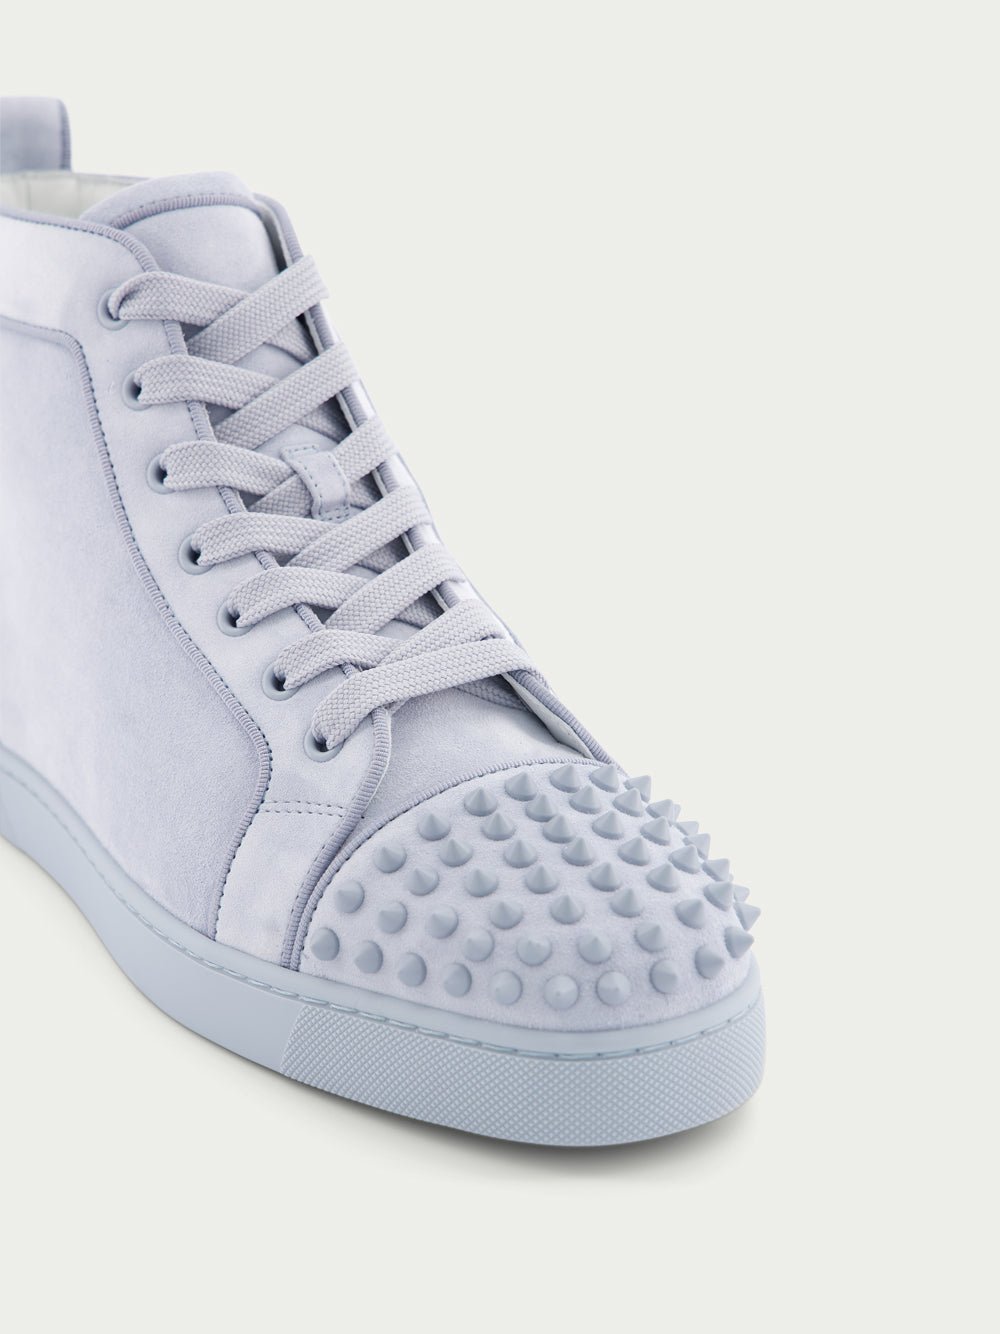 Christian LouboutinLou Spikes high-top veau velours sneakers at Fashion Clinic